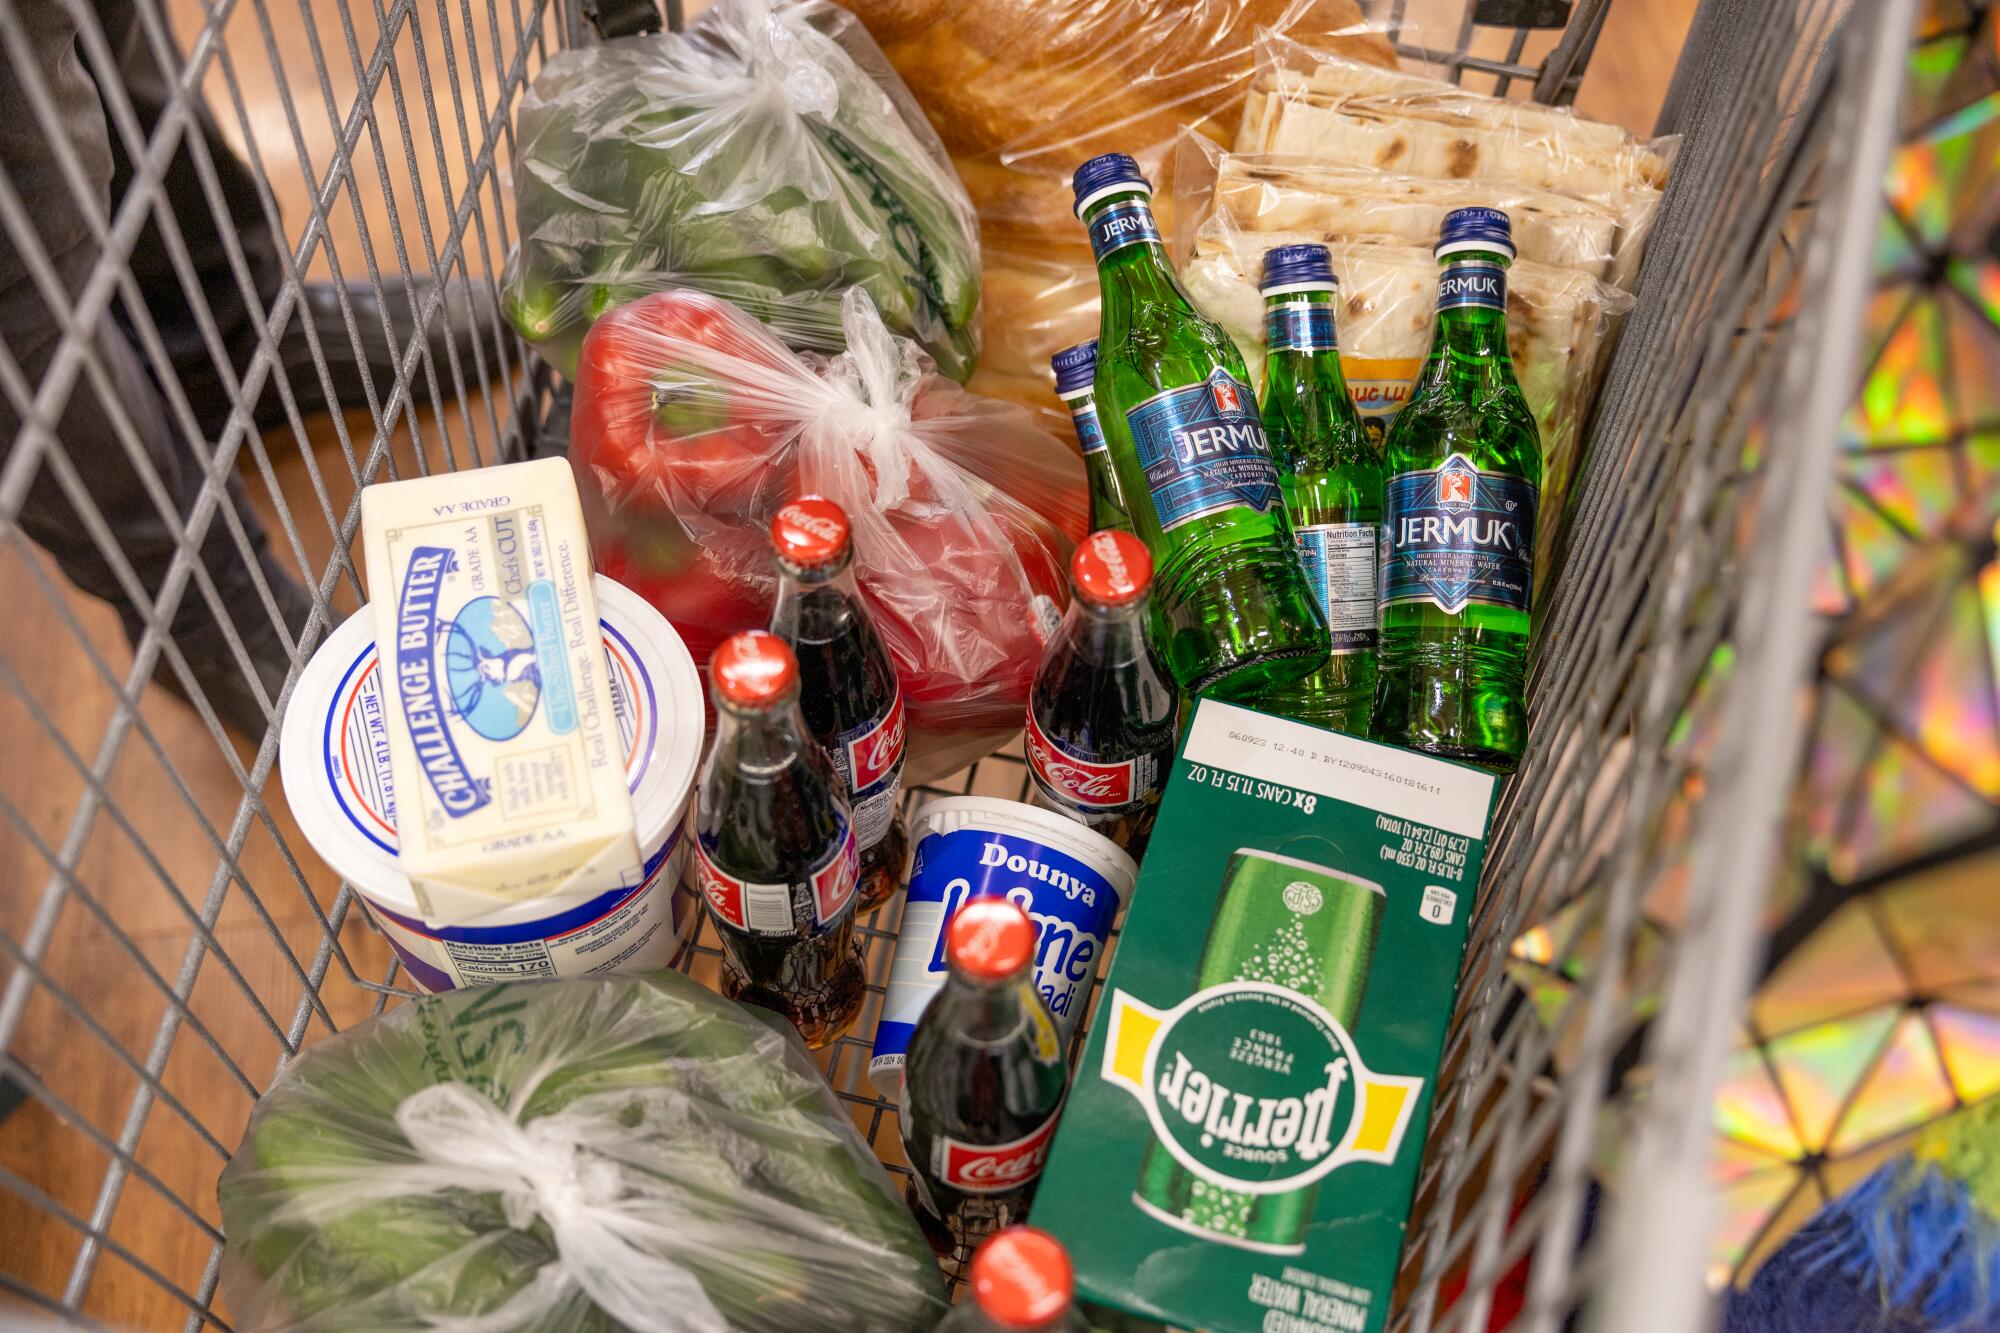 An overhead view of a shopping cart, holding products including butter, veggies and bottles of Coca-Cola and Jermuk water.